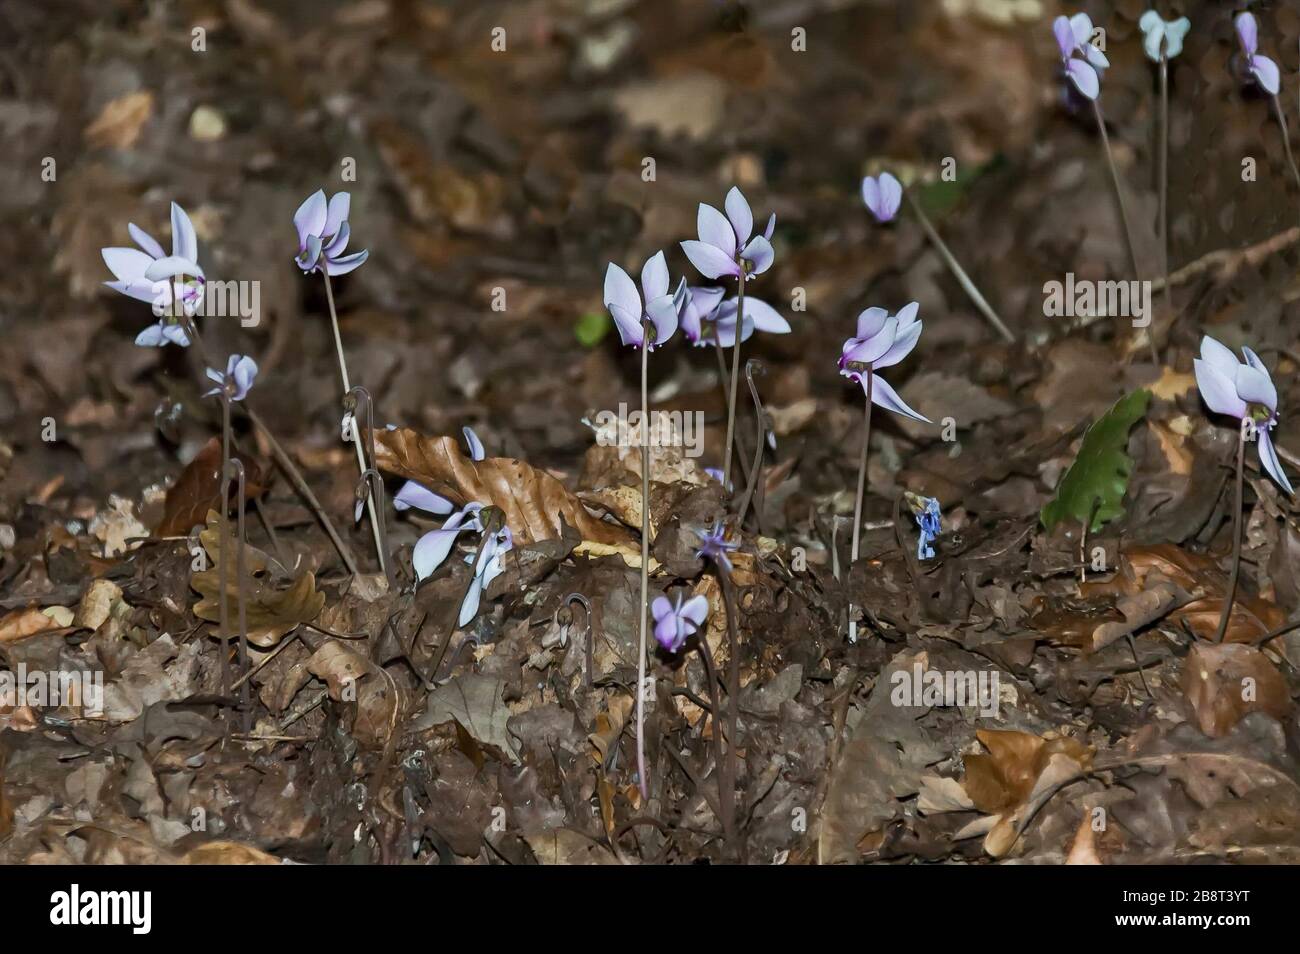 Purple and white cyclamen flowers on a dry leaves background, Sredna Gora mountain, Bulgaria Stock Photo